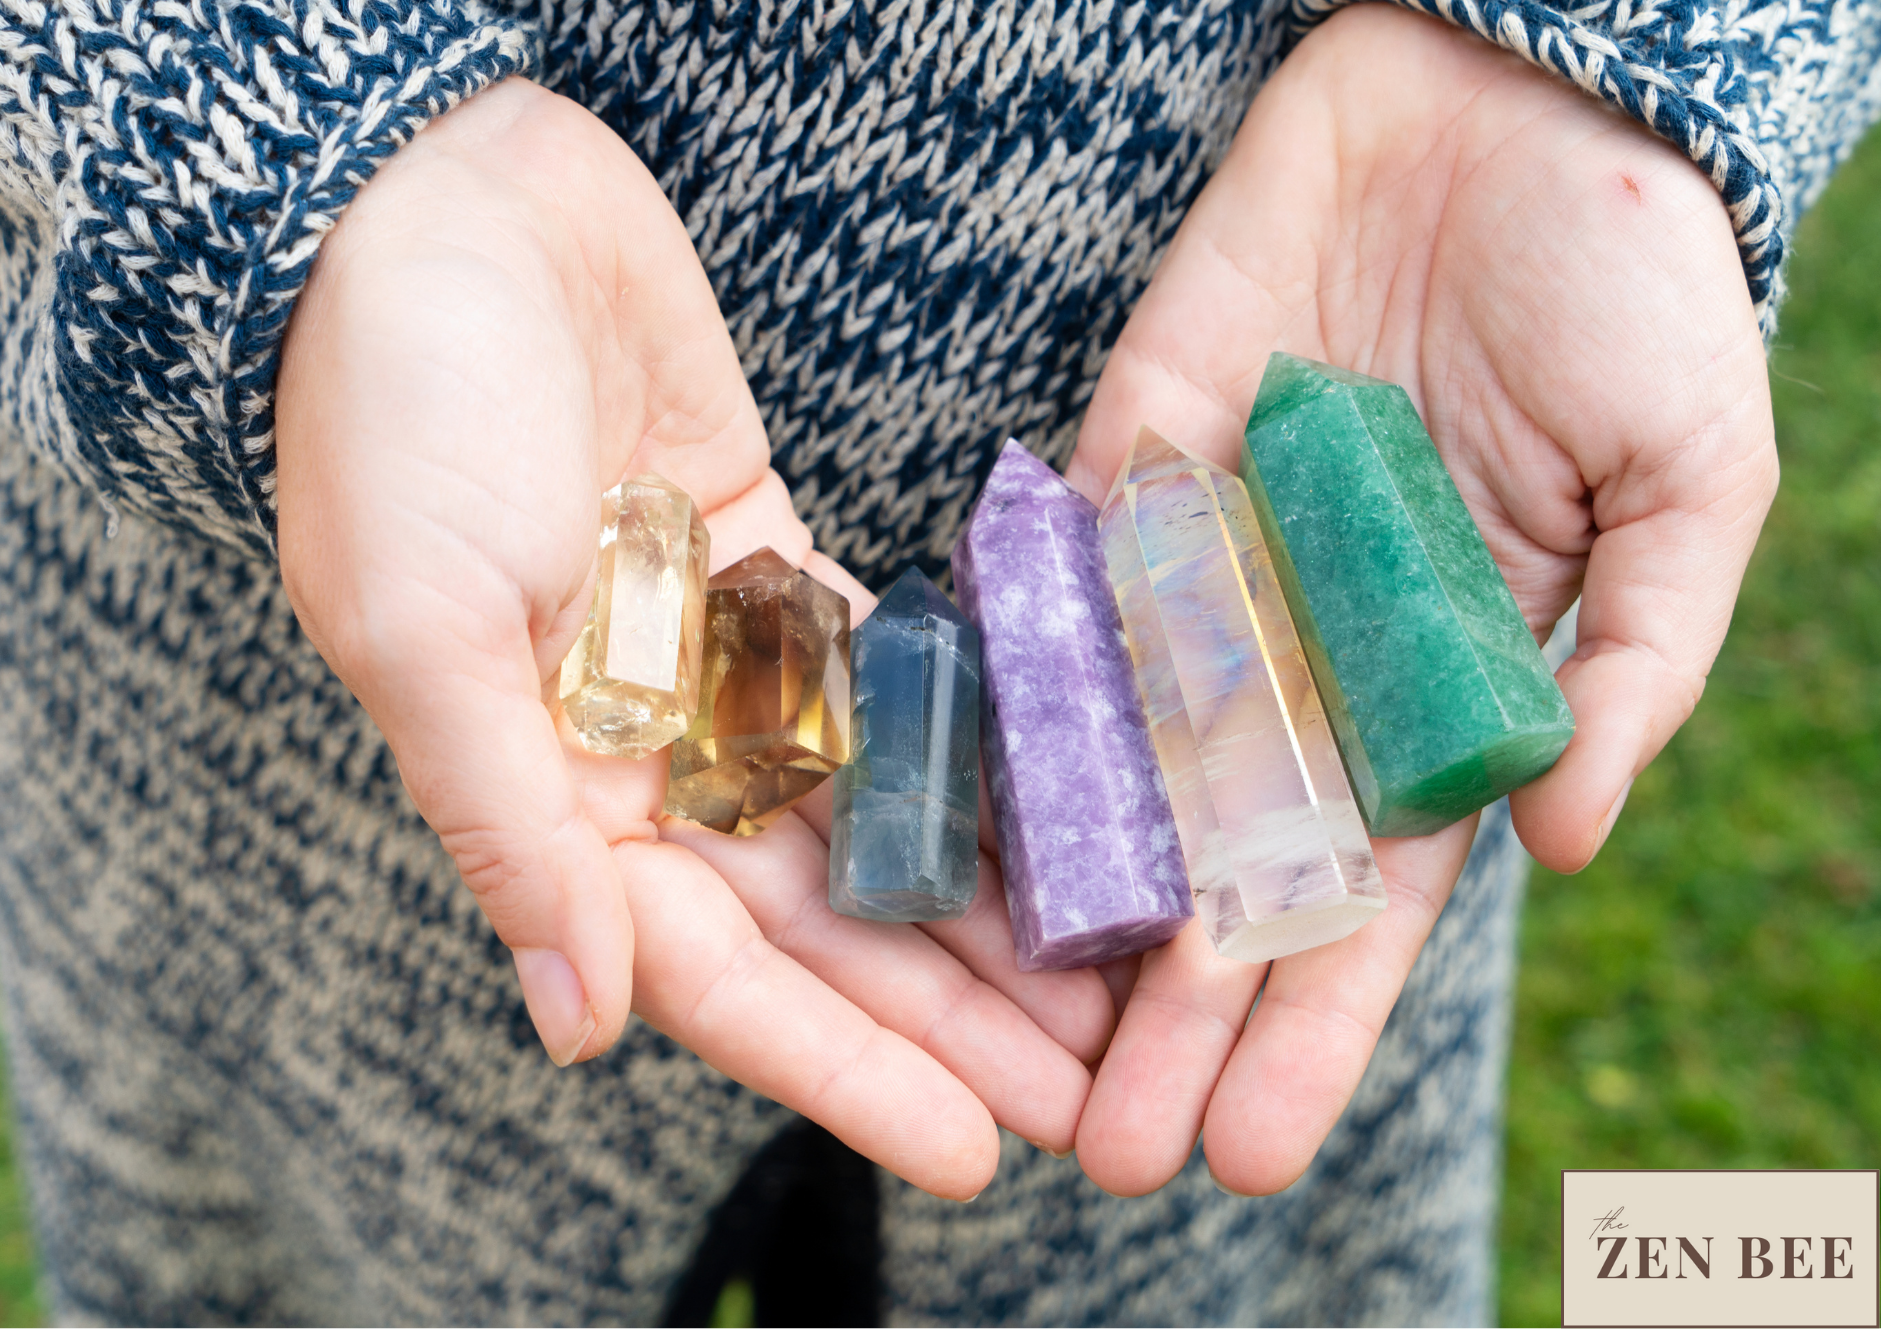 What Are Healing Crystals, and Do They Work